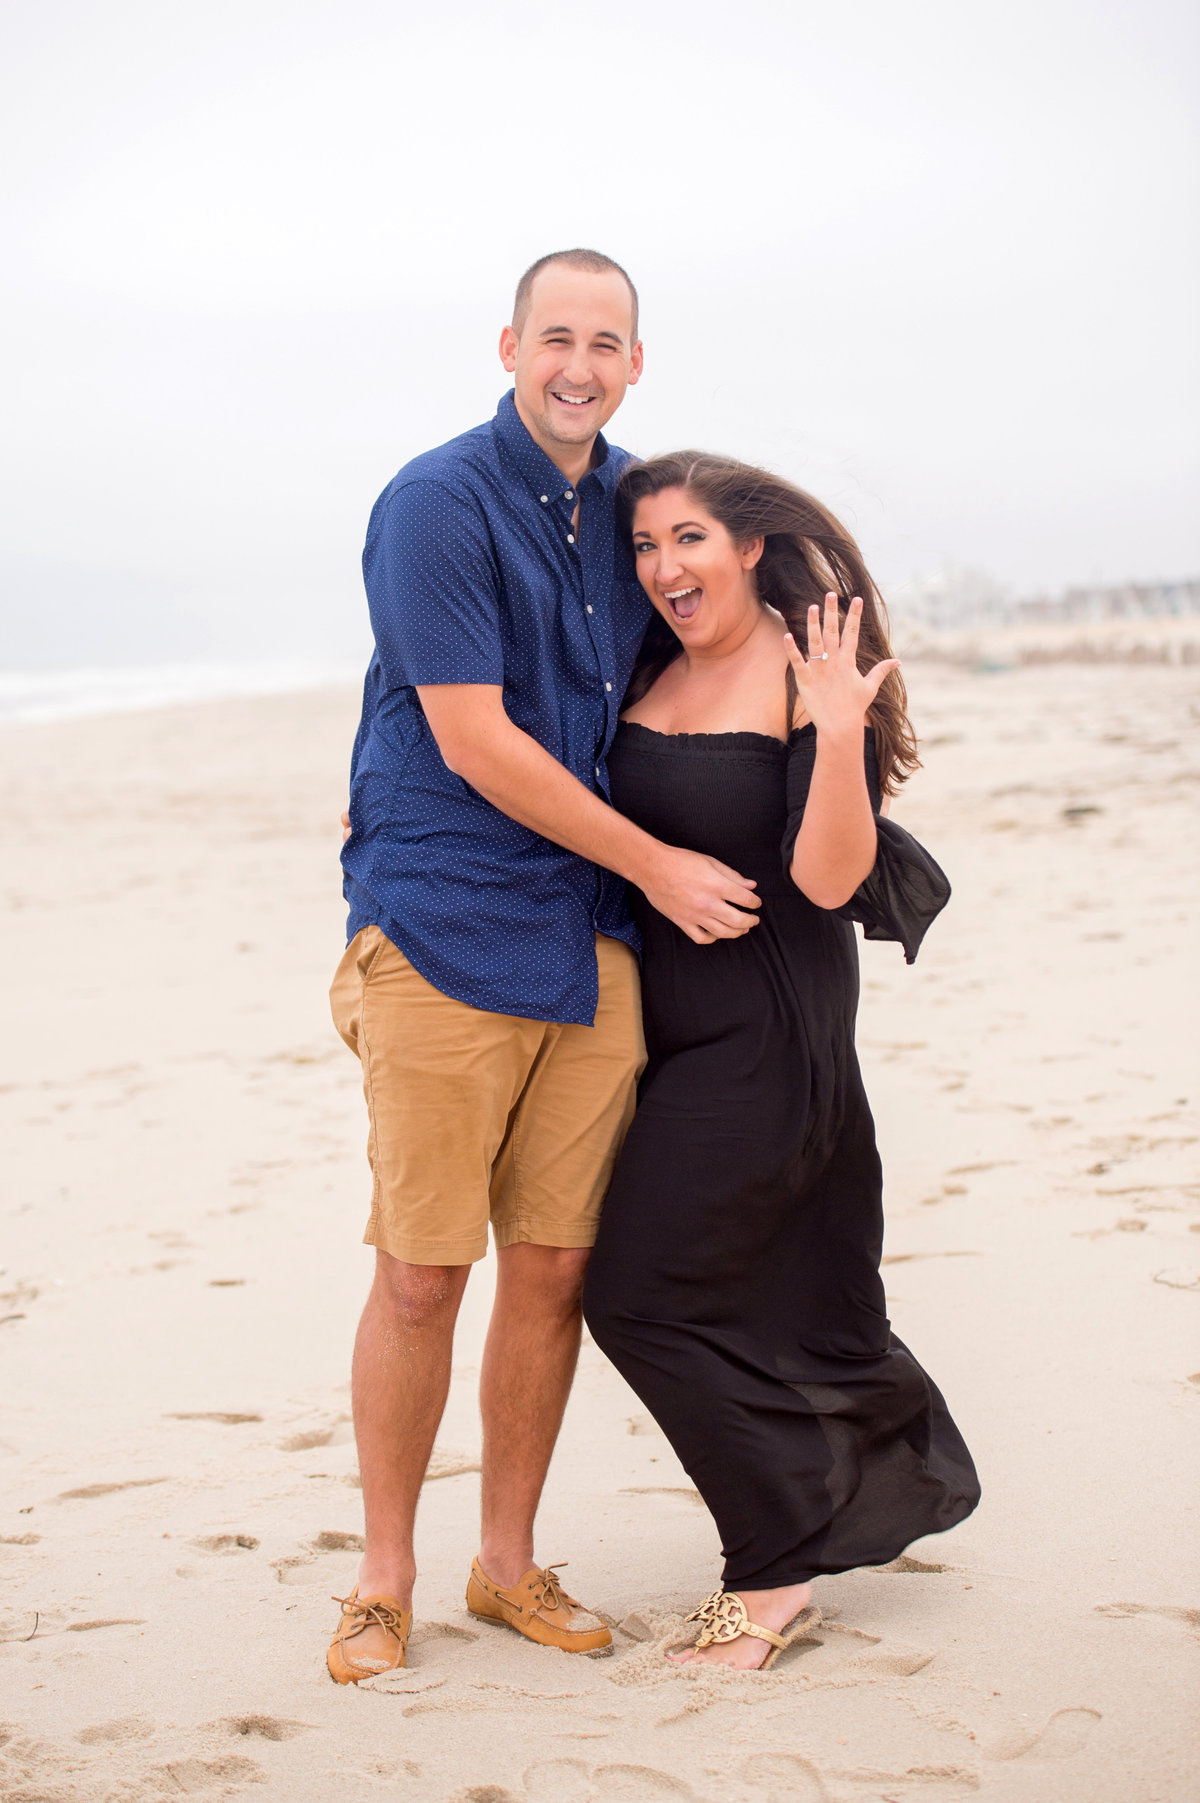 lavallette-beach-surprise-proposal-imagery-by-marianne-26